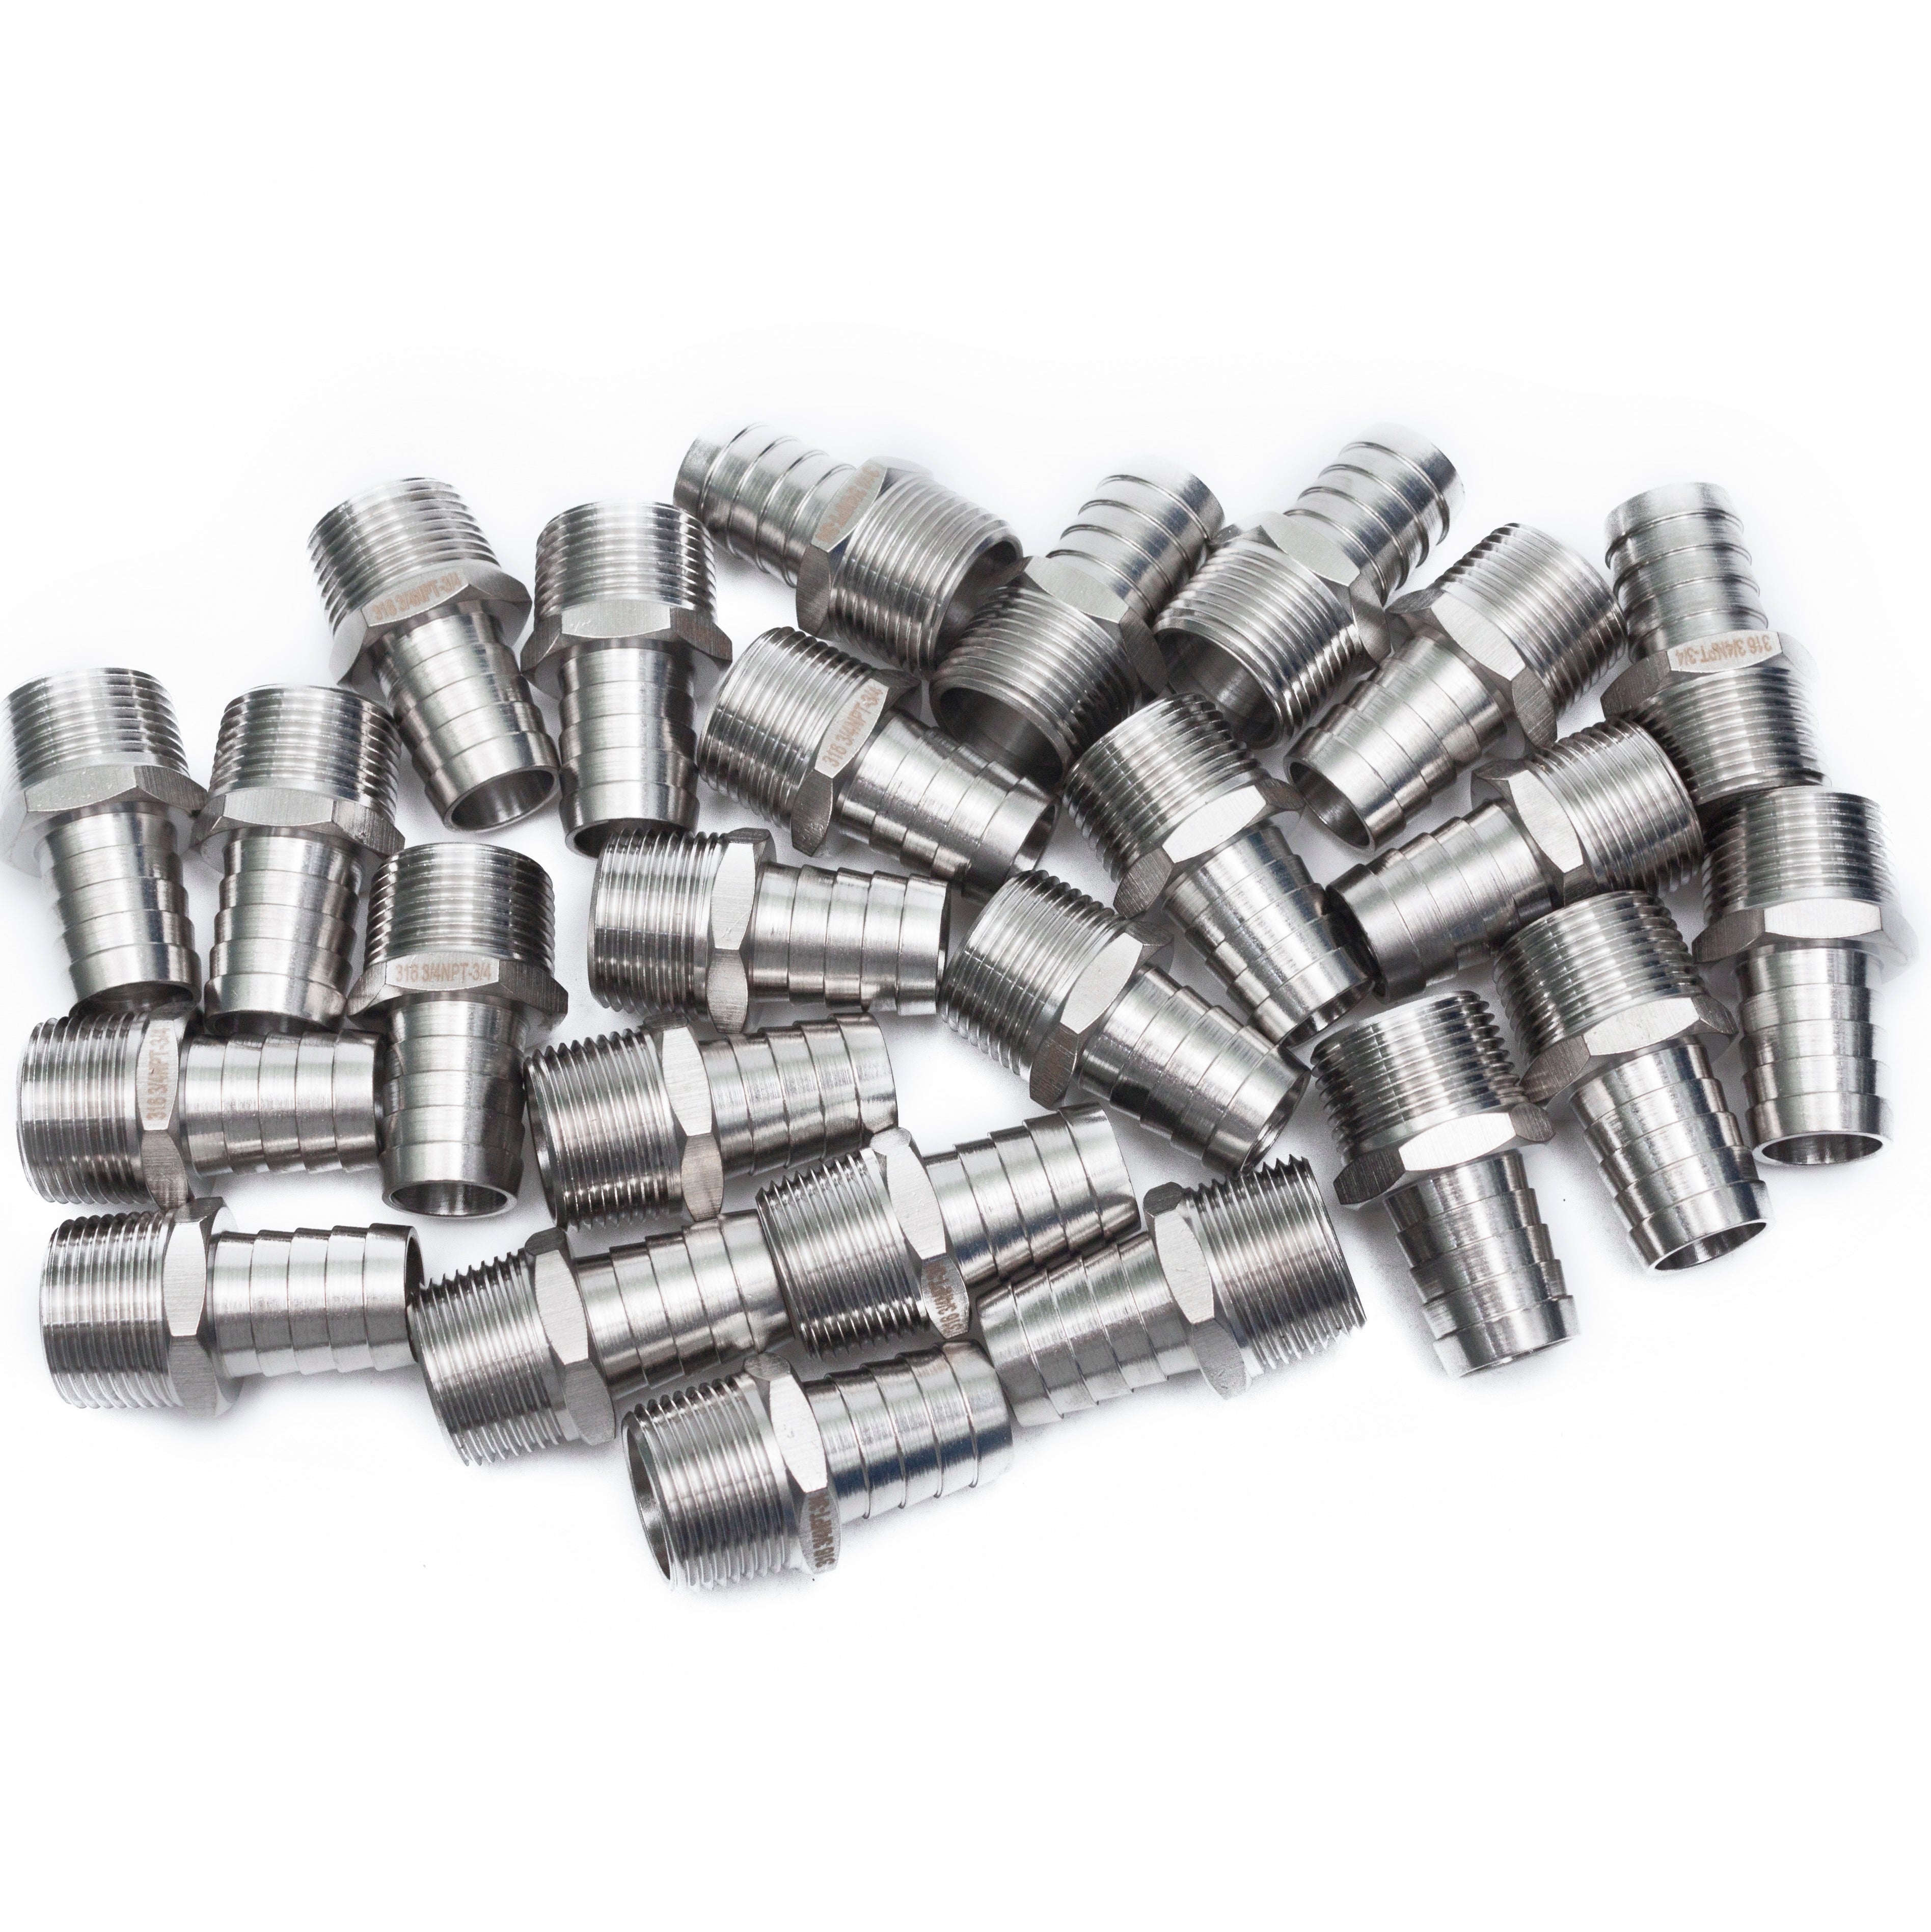 LTWFITTING Bar Production Stainless Steel 316 Barb Fitting Coupler/Connector 3/4 Inch Hose ID x 3/4 Inch Male NPT Air Fuel Water (Pack of 25)